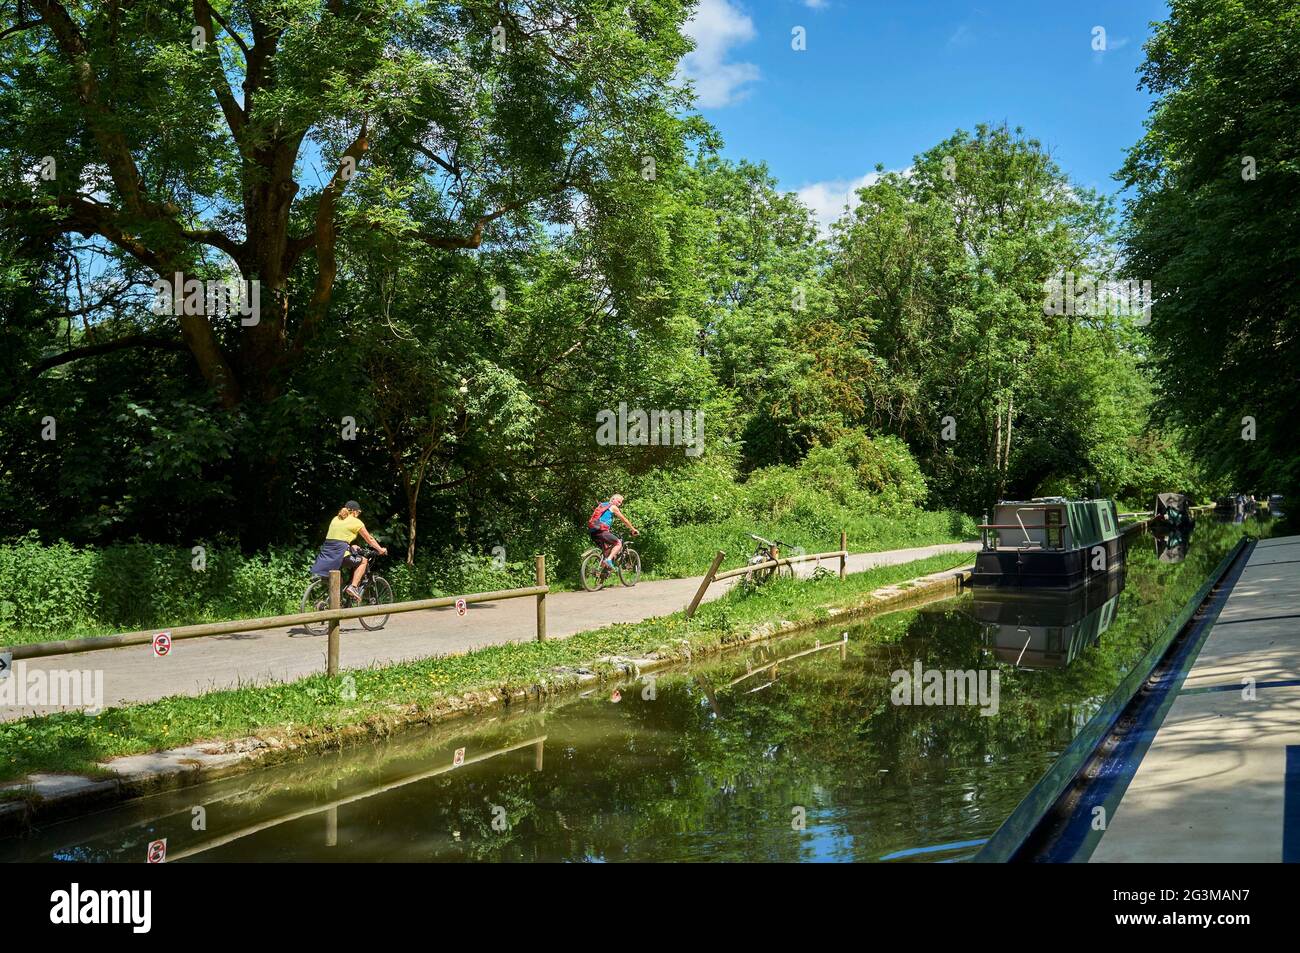 Boats moored  on the Kennet & Avon Canal, at Bradford upon Avon, South West England, UK Stock Photo